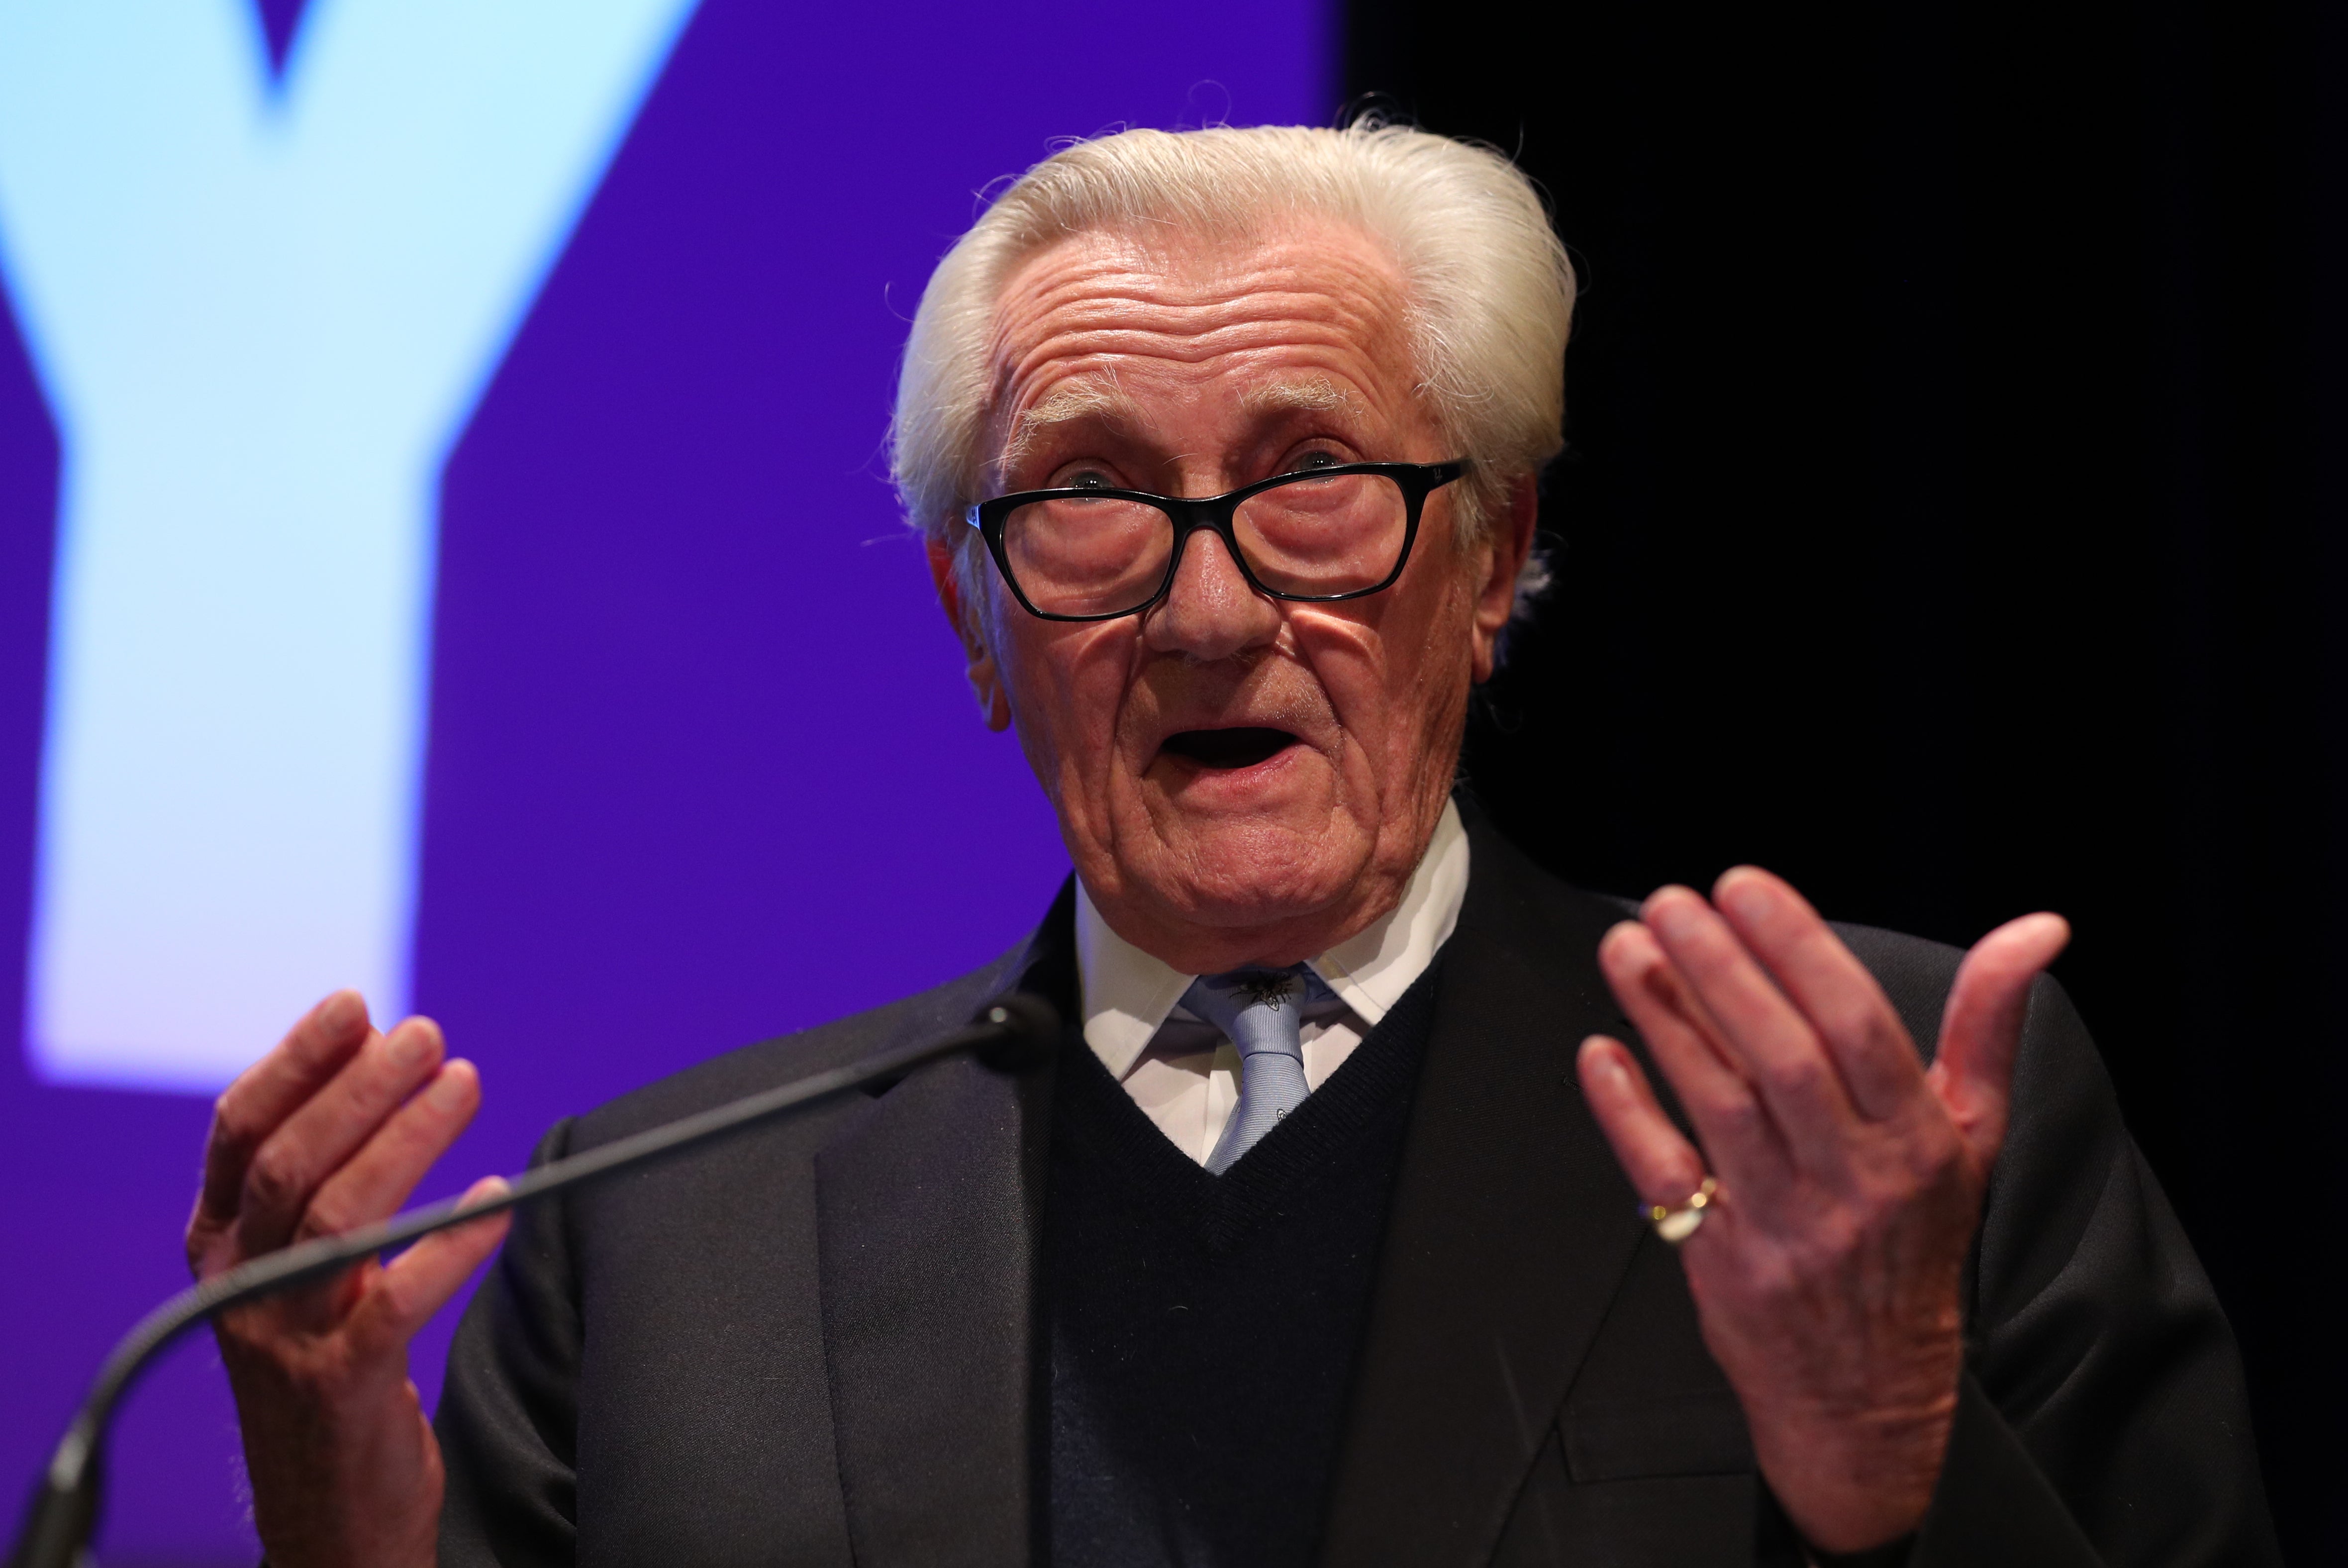 Lord Heseltine warned project would be left as ‘toy town’ rail